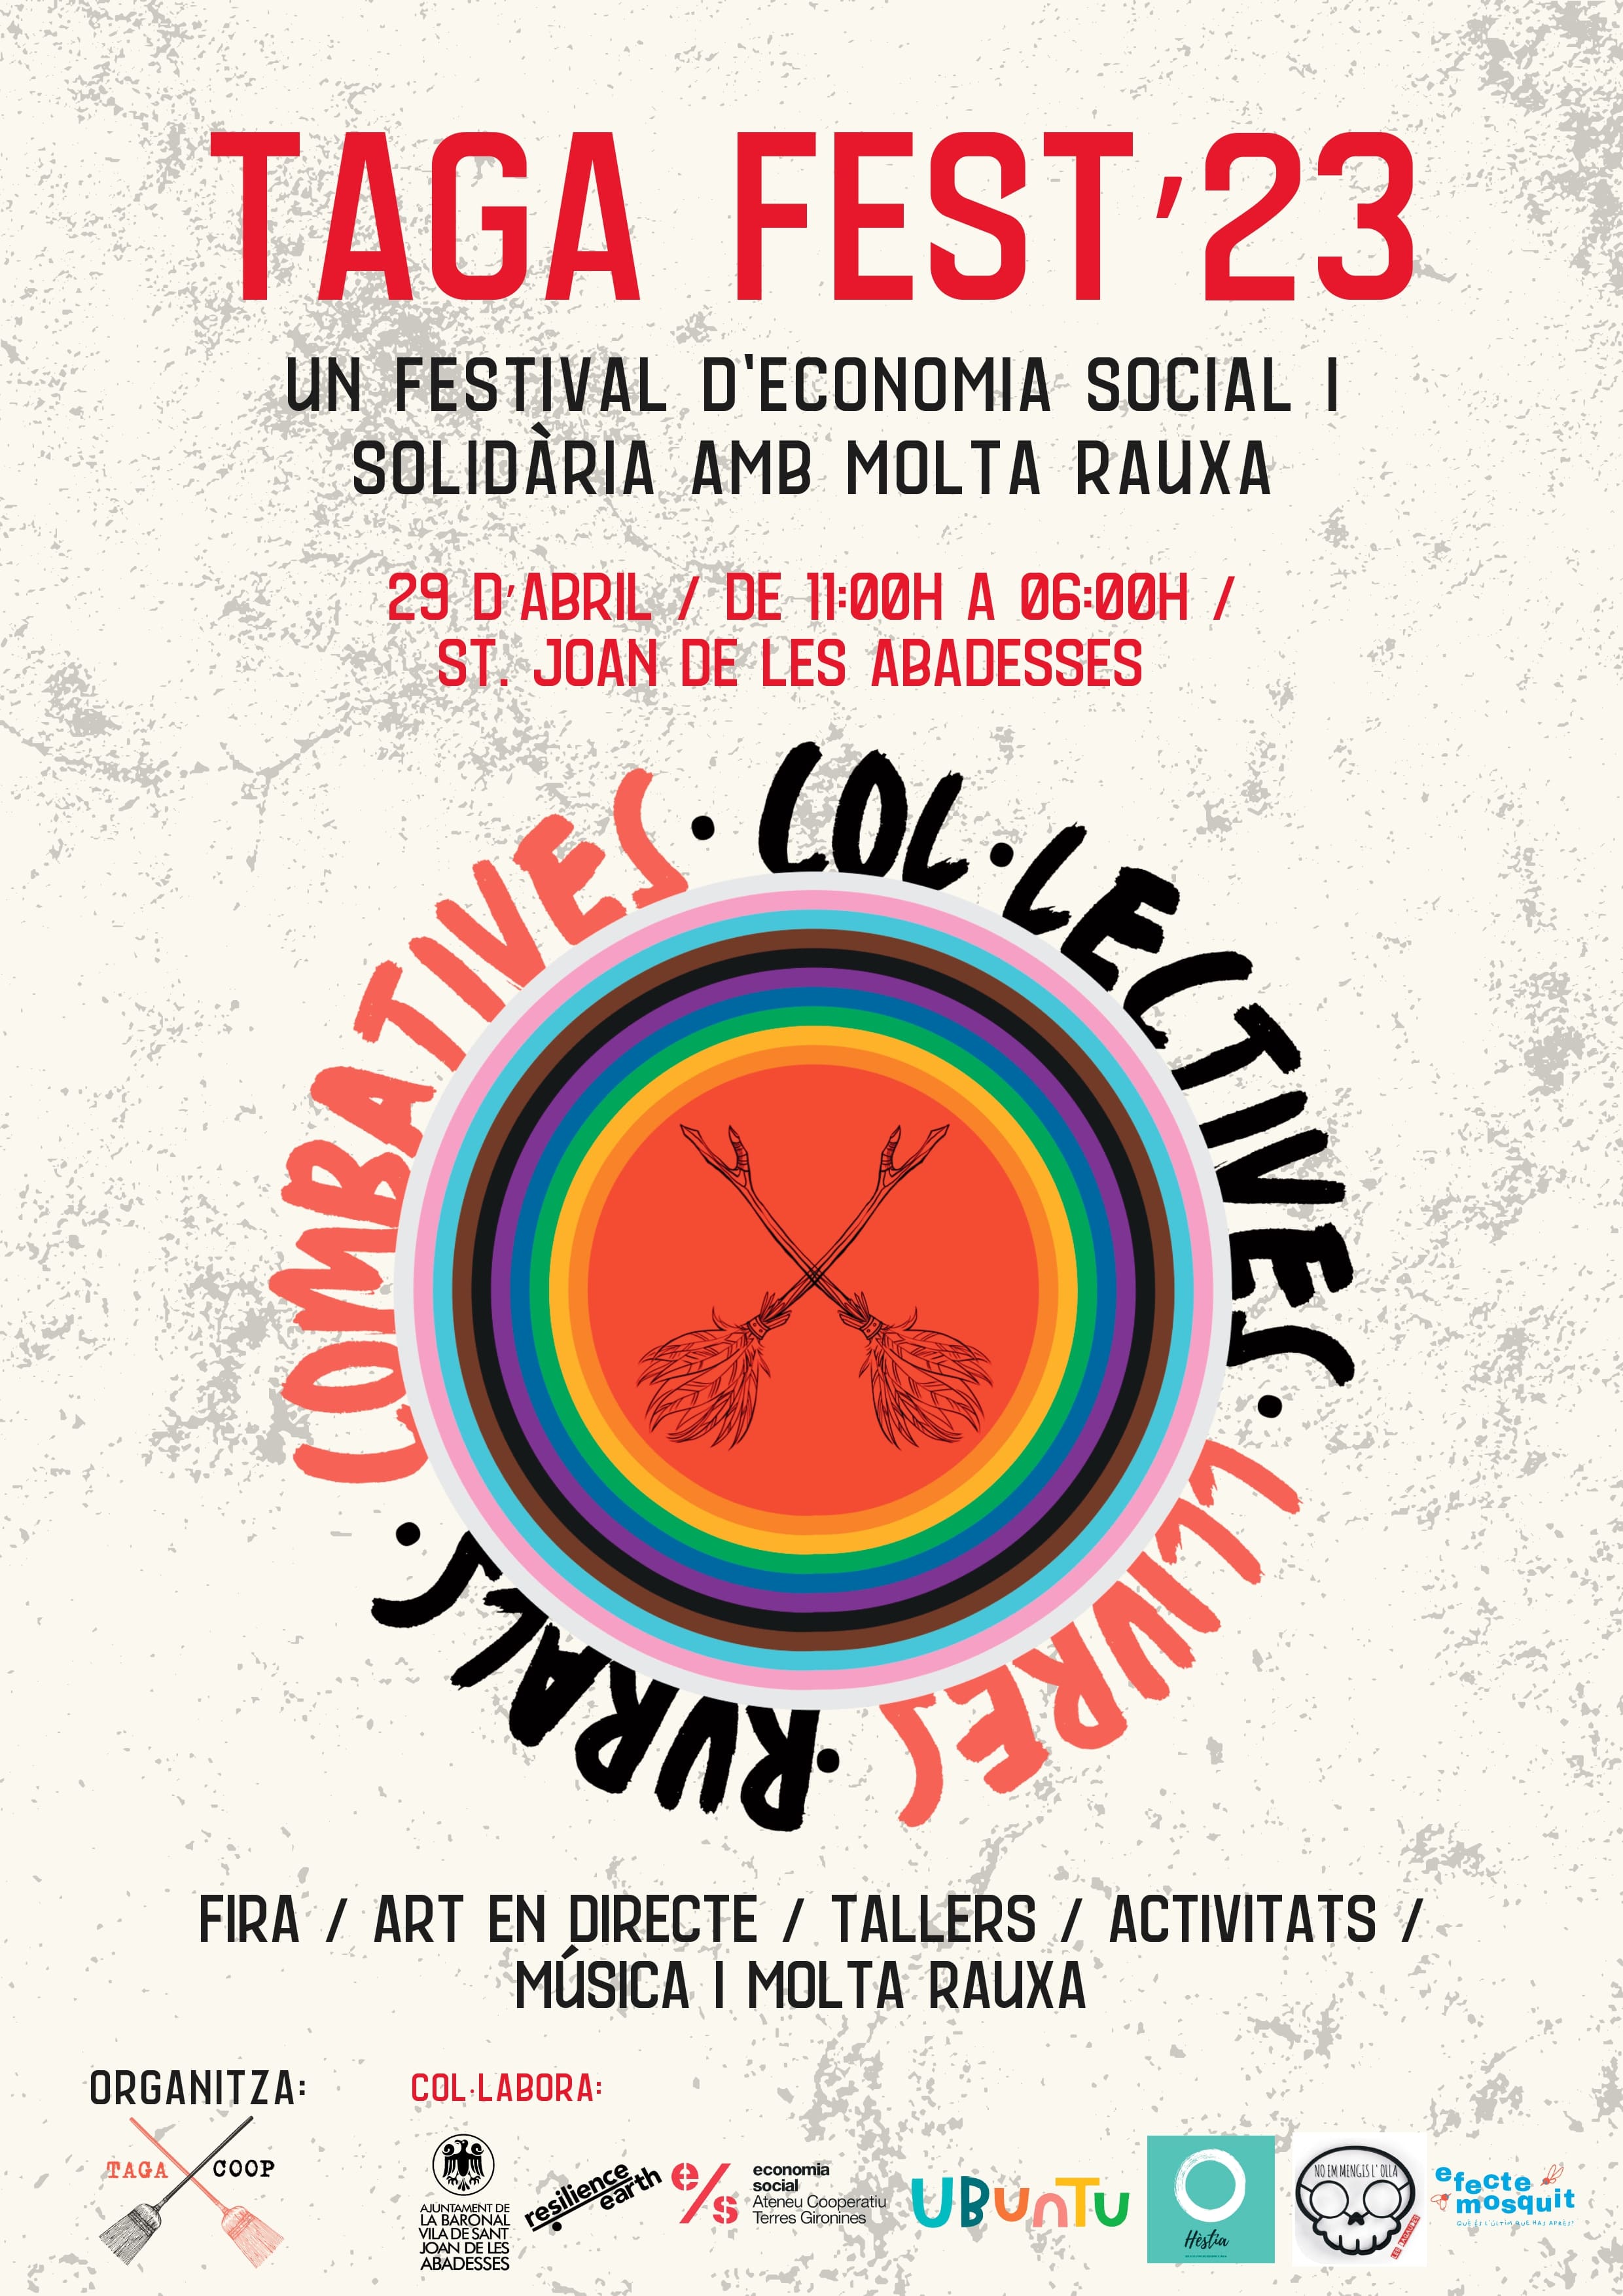 CARTELL TAGFEST TURISME page 0001 1